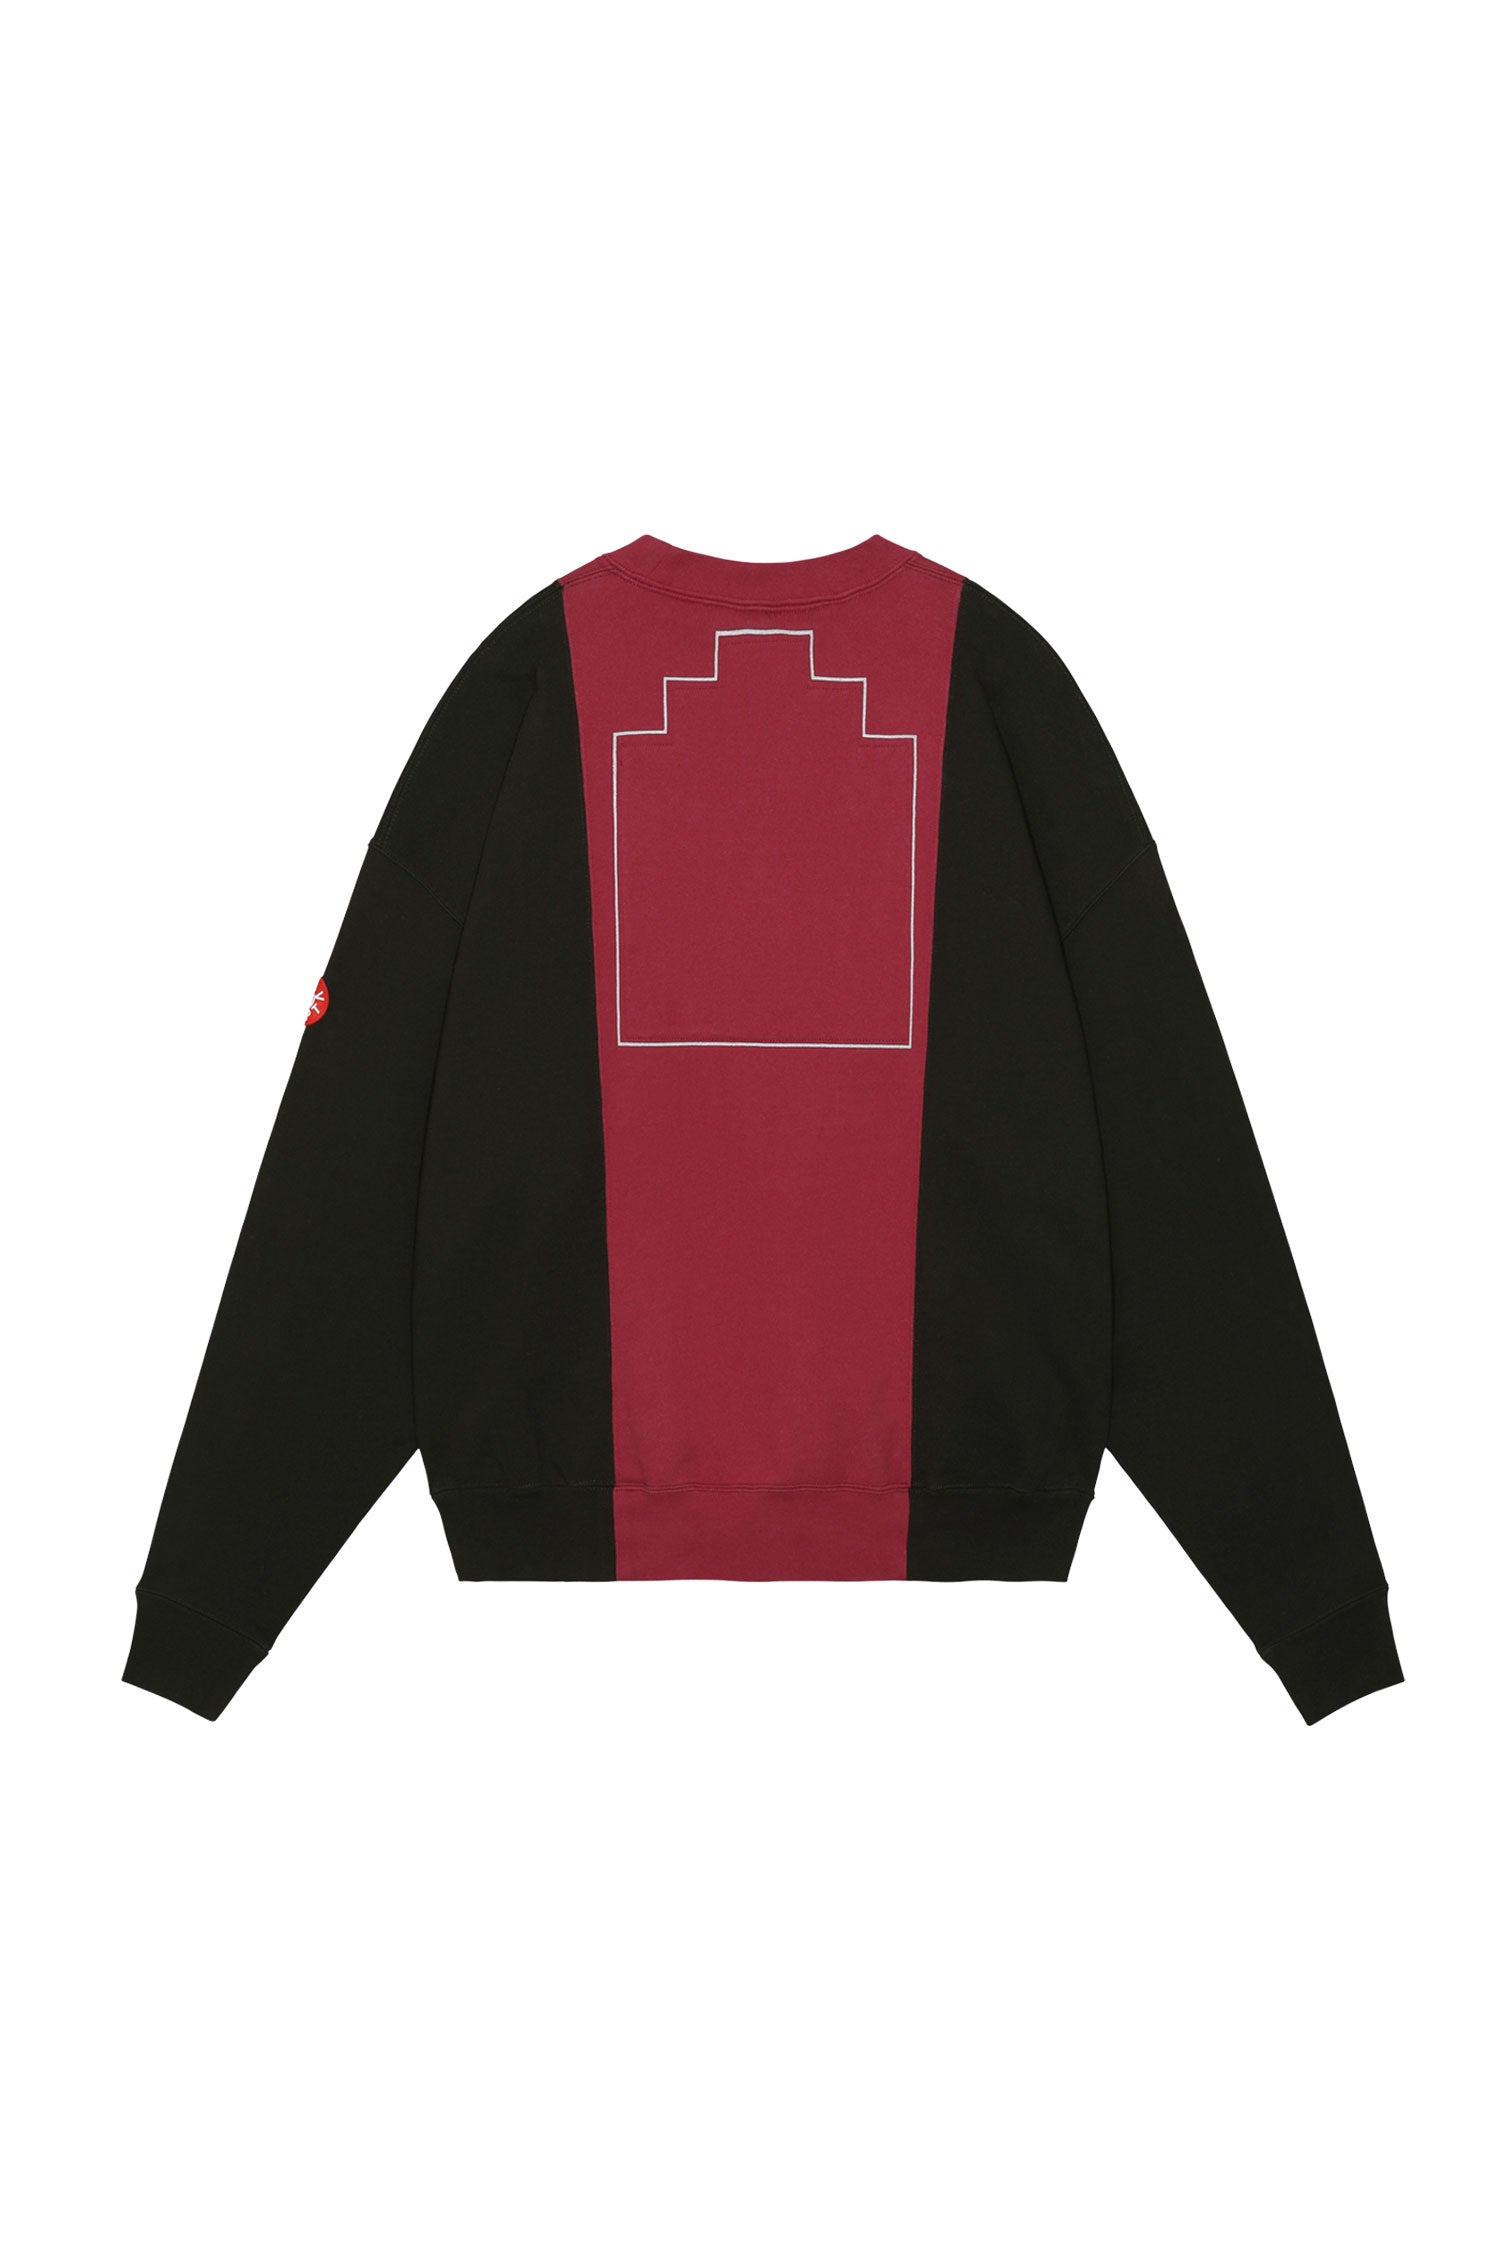 The CAV EMPT - PANELED TWO TONE CREW NECK  available online with global shipping, and in PAM Stores Melbourne and Sydney.